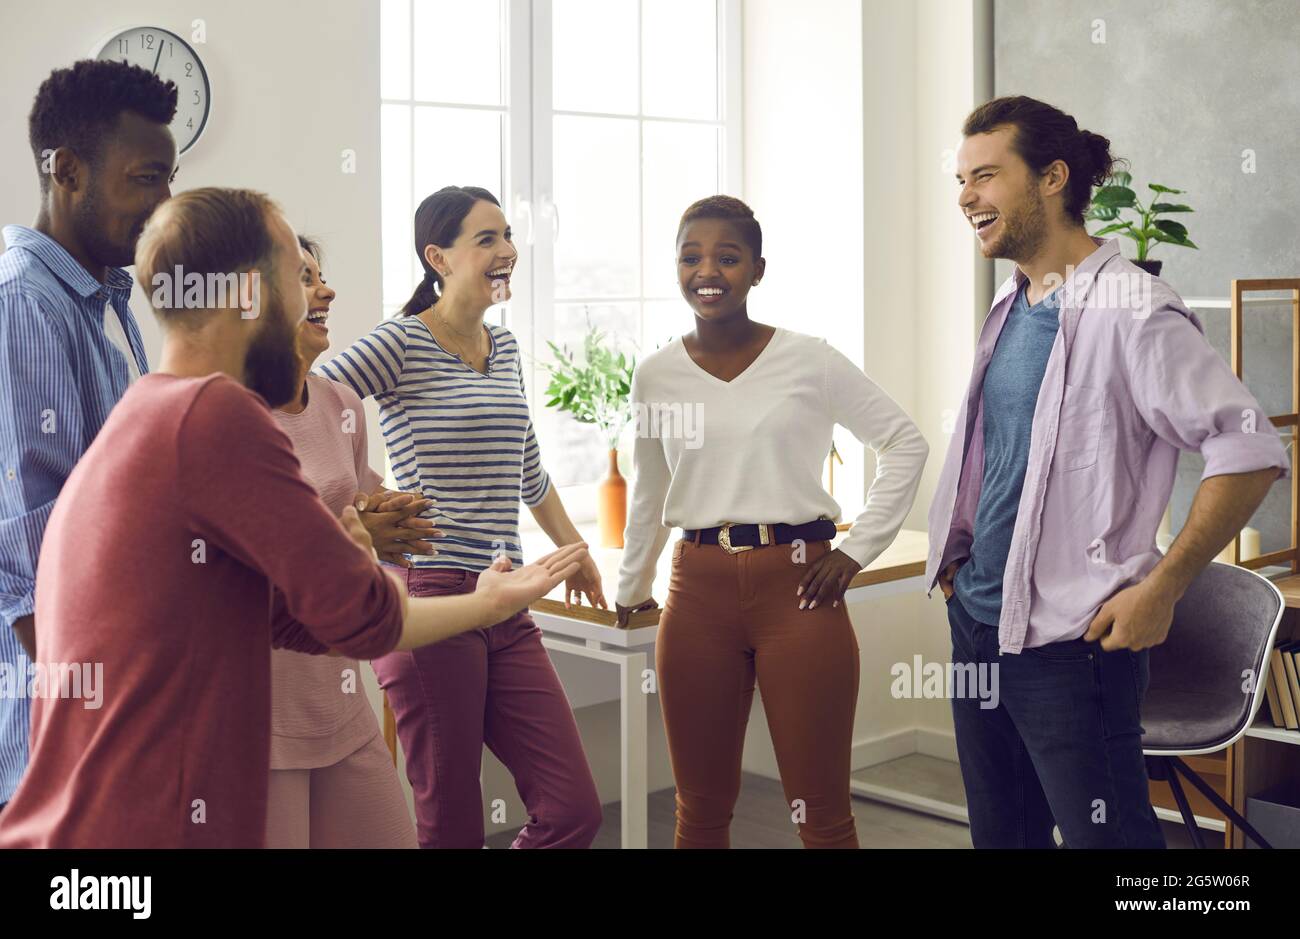 Diverse group of friends telling funny stories, laughing and having fun together Stock Photo